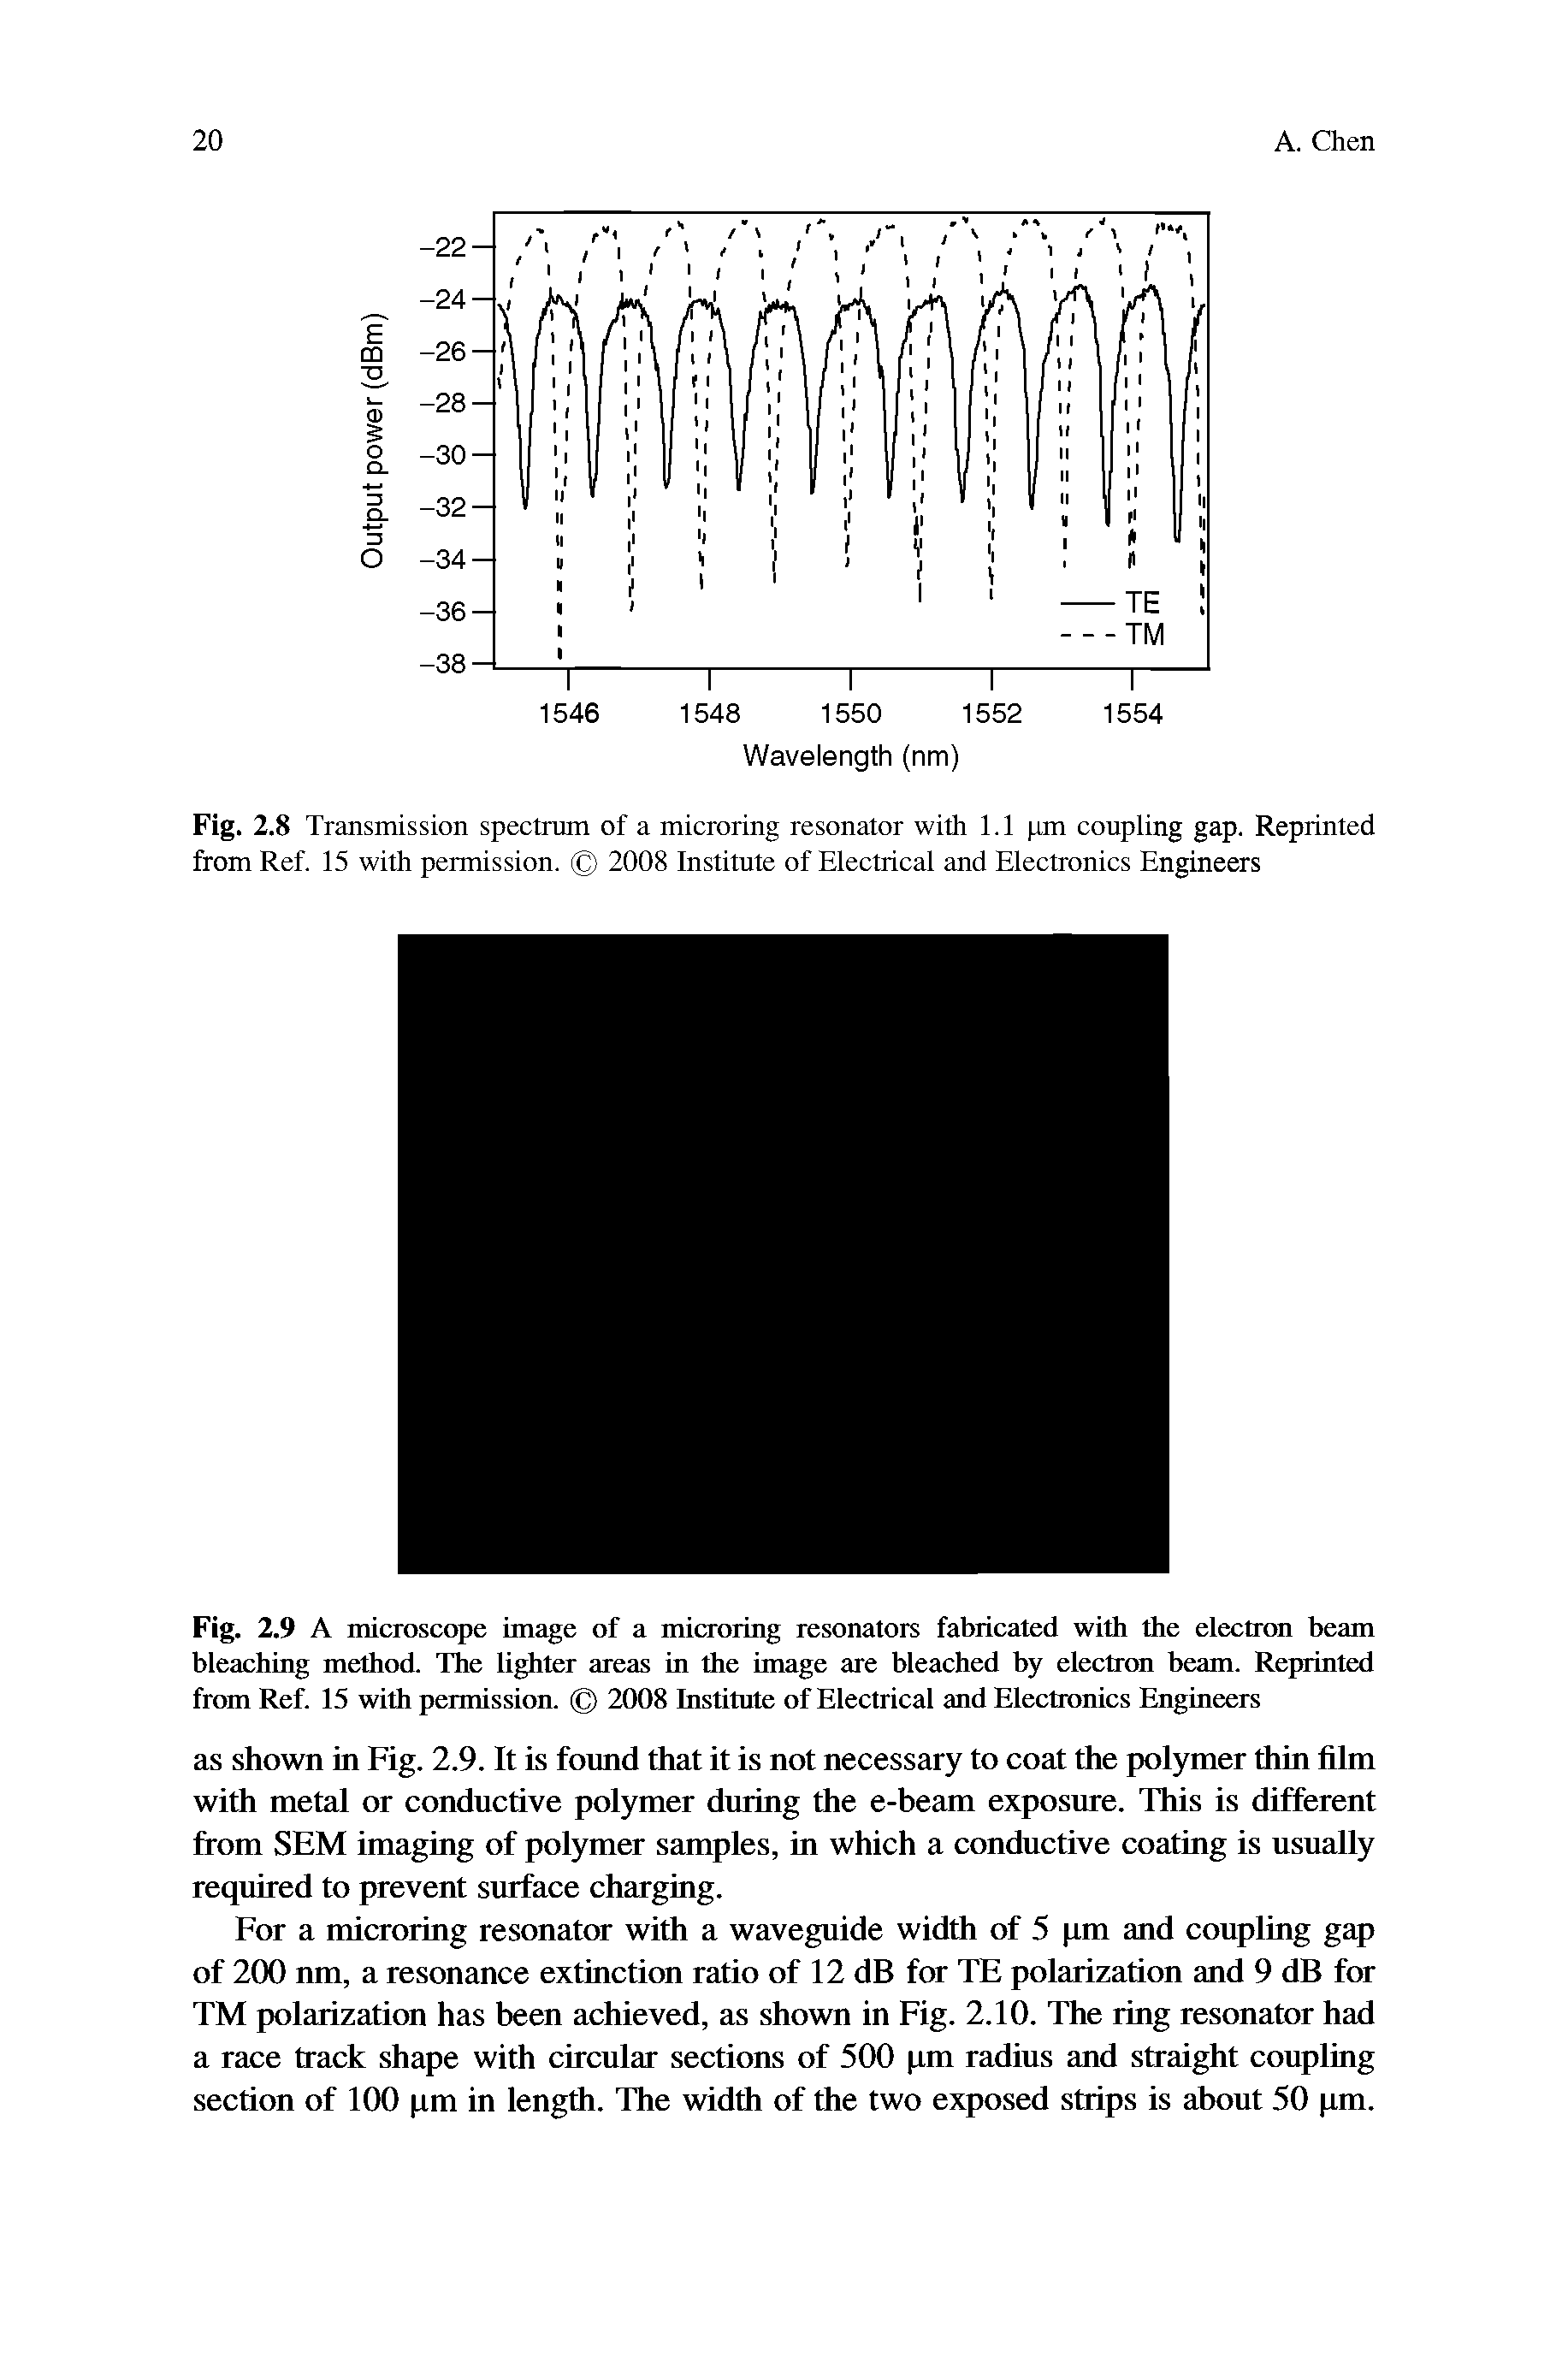 Fig. 2.8 Transmission spectrum of a microring resonator with 1.1 pm coupling gap. Reprinted from Ref. 15 with permission. 2008 Institute of Electrical and Electronics Engineers...